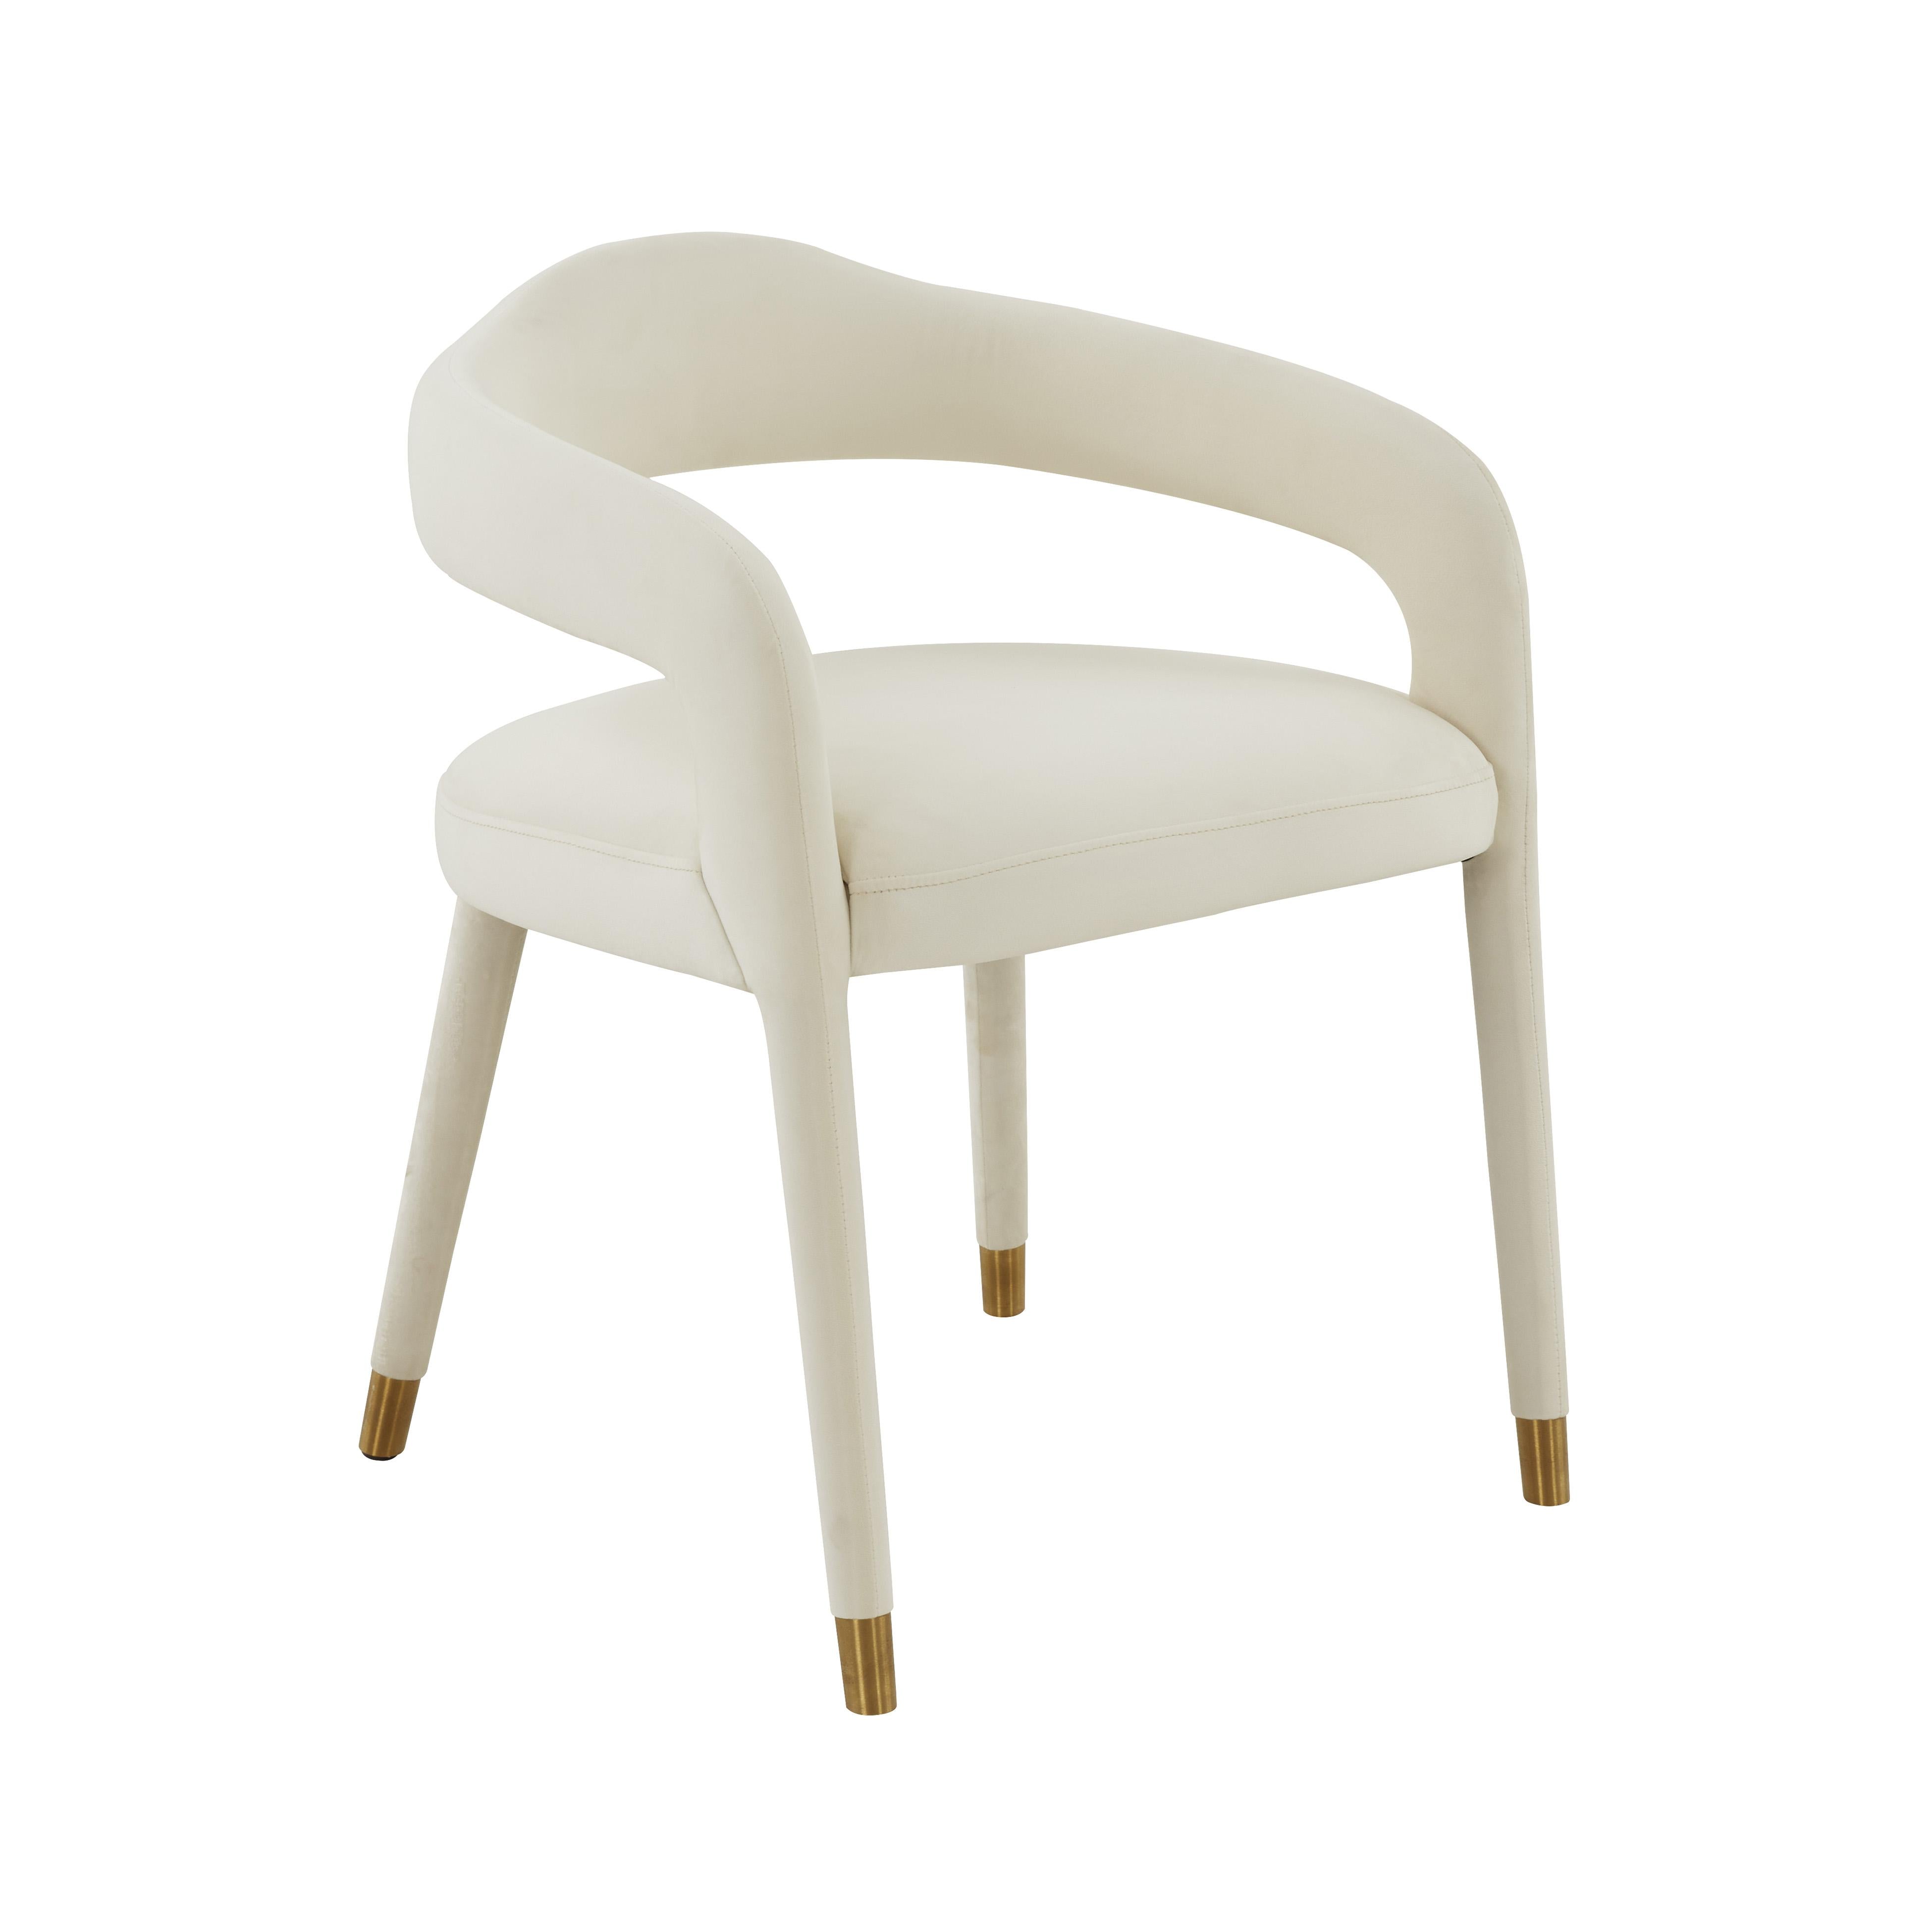 Tov Furniture Dining Chairs - Lucia Cream Velvet Dining Chair